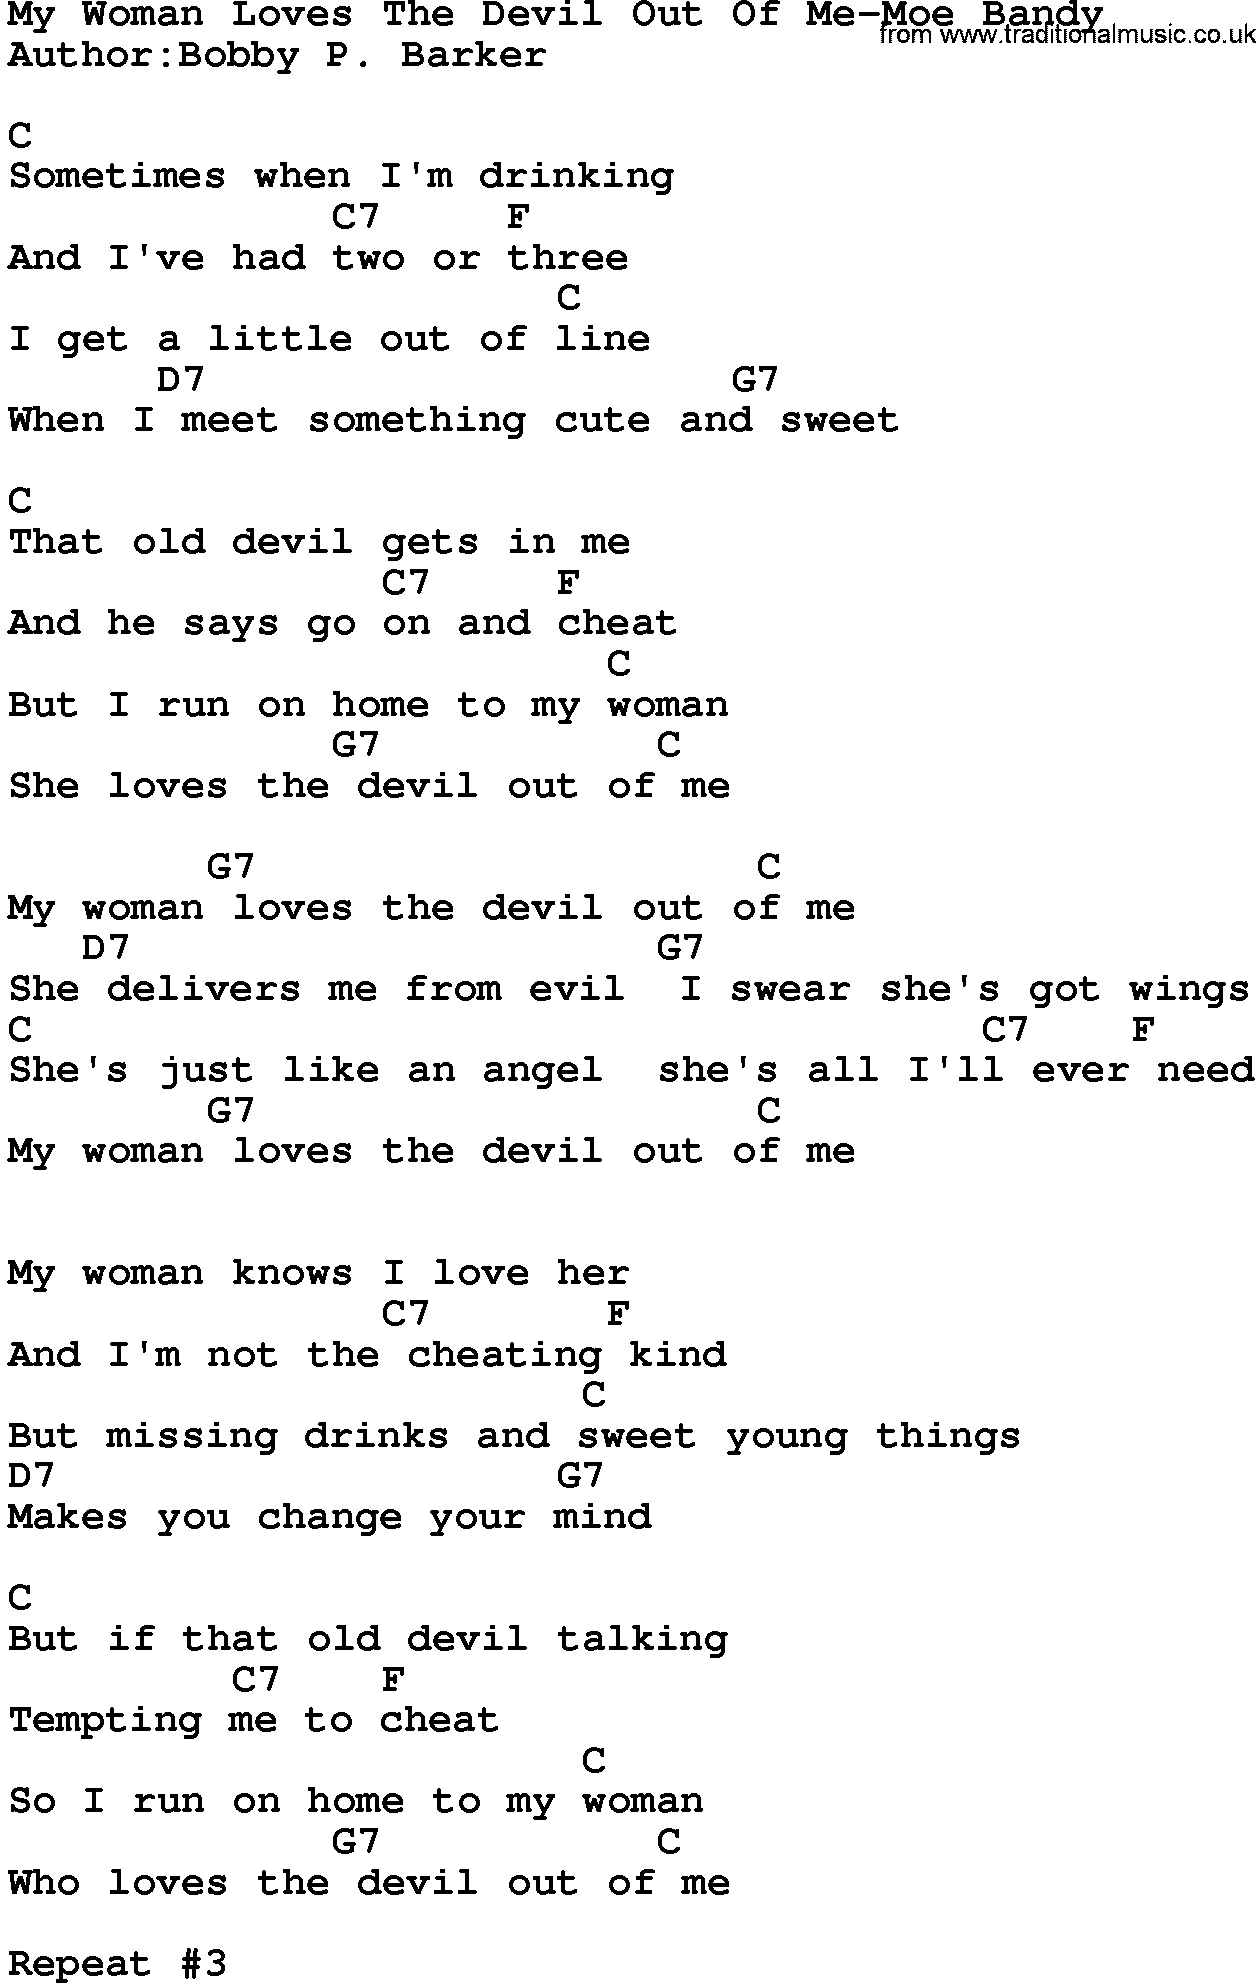 Country music song: My Woman Loves The Devil Out Of Me-Moe Bandy lyrics and chords